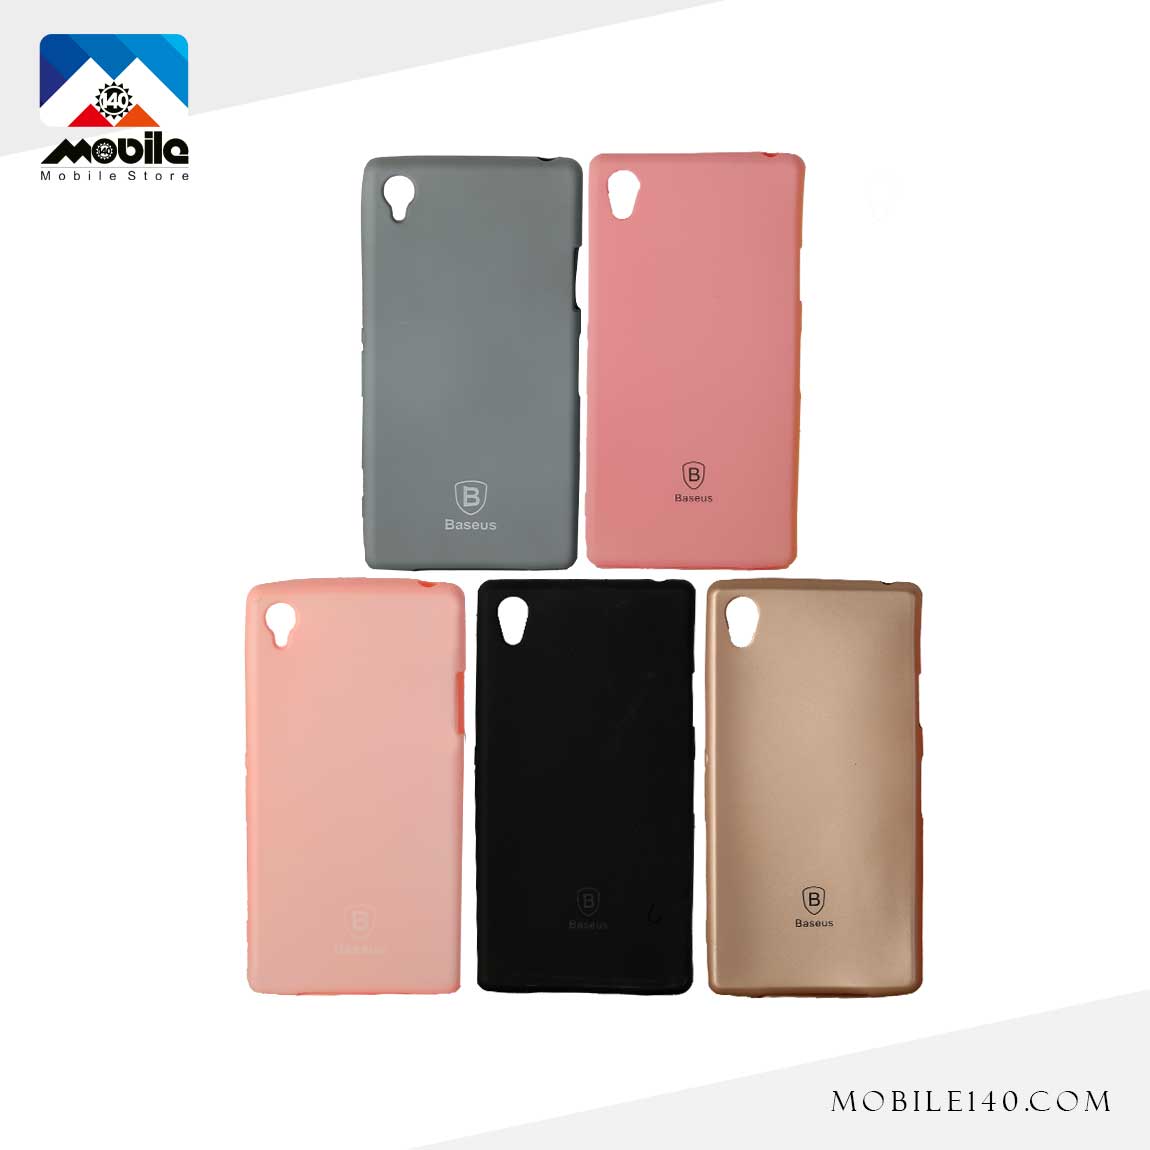 Baseus Covers for Sony Xperia Z1 1